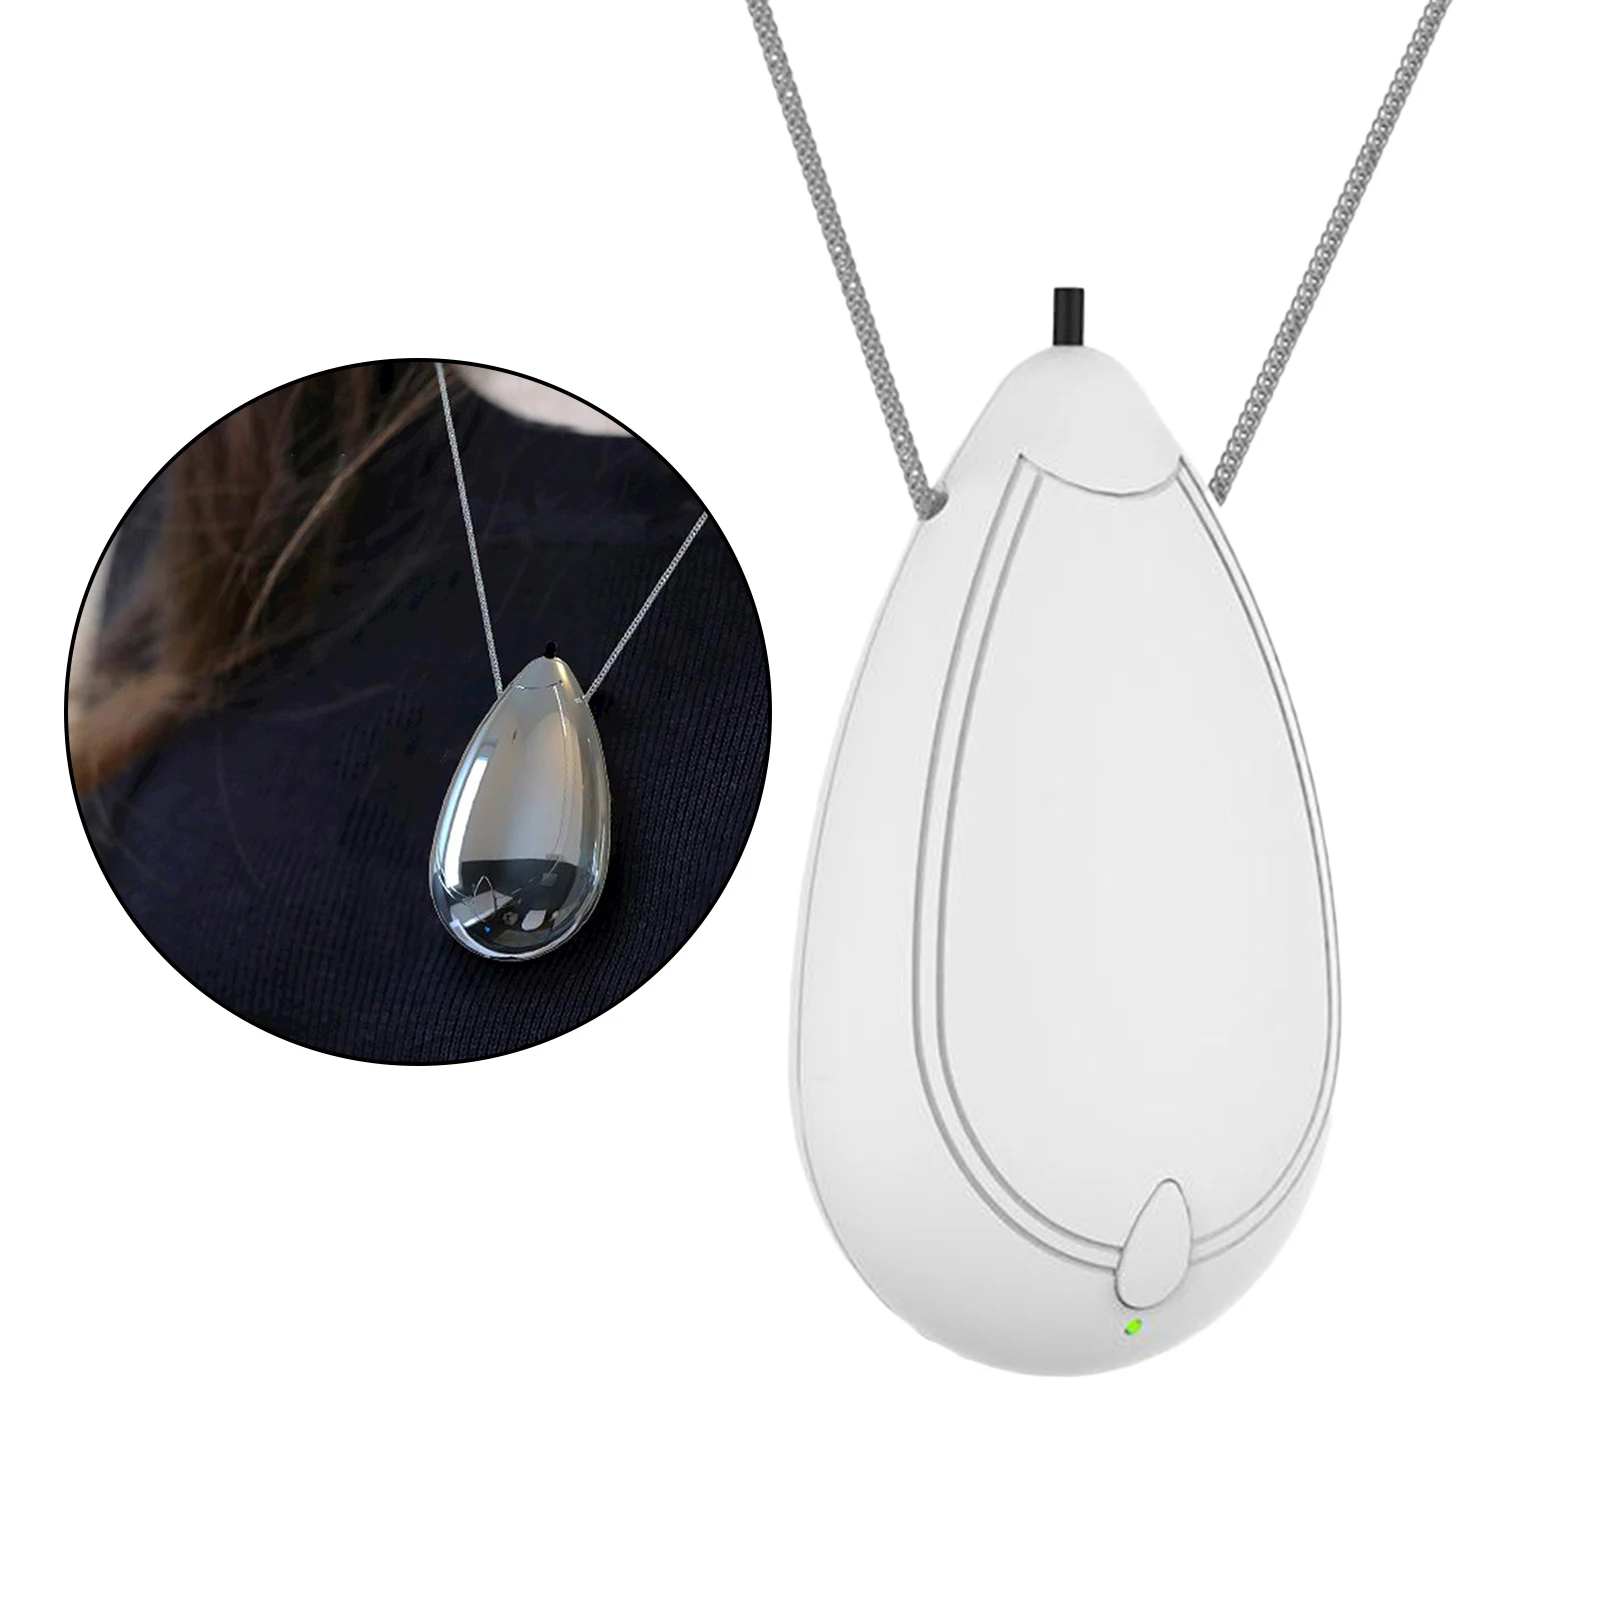 Wearable ,Personal  Necklace Around The Neck,Travel  ,Remove Smoke Smell,Protable Ionic  Gifts